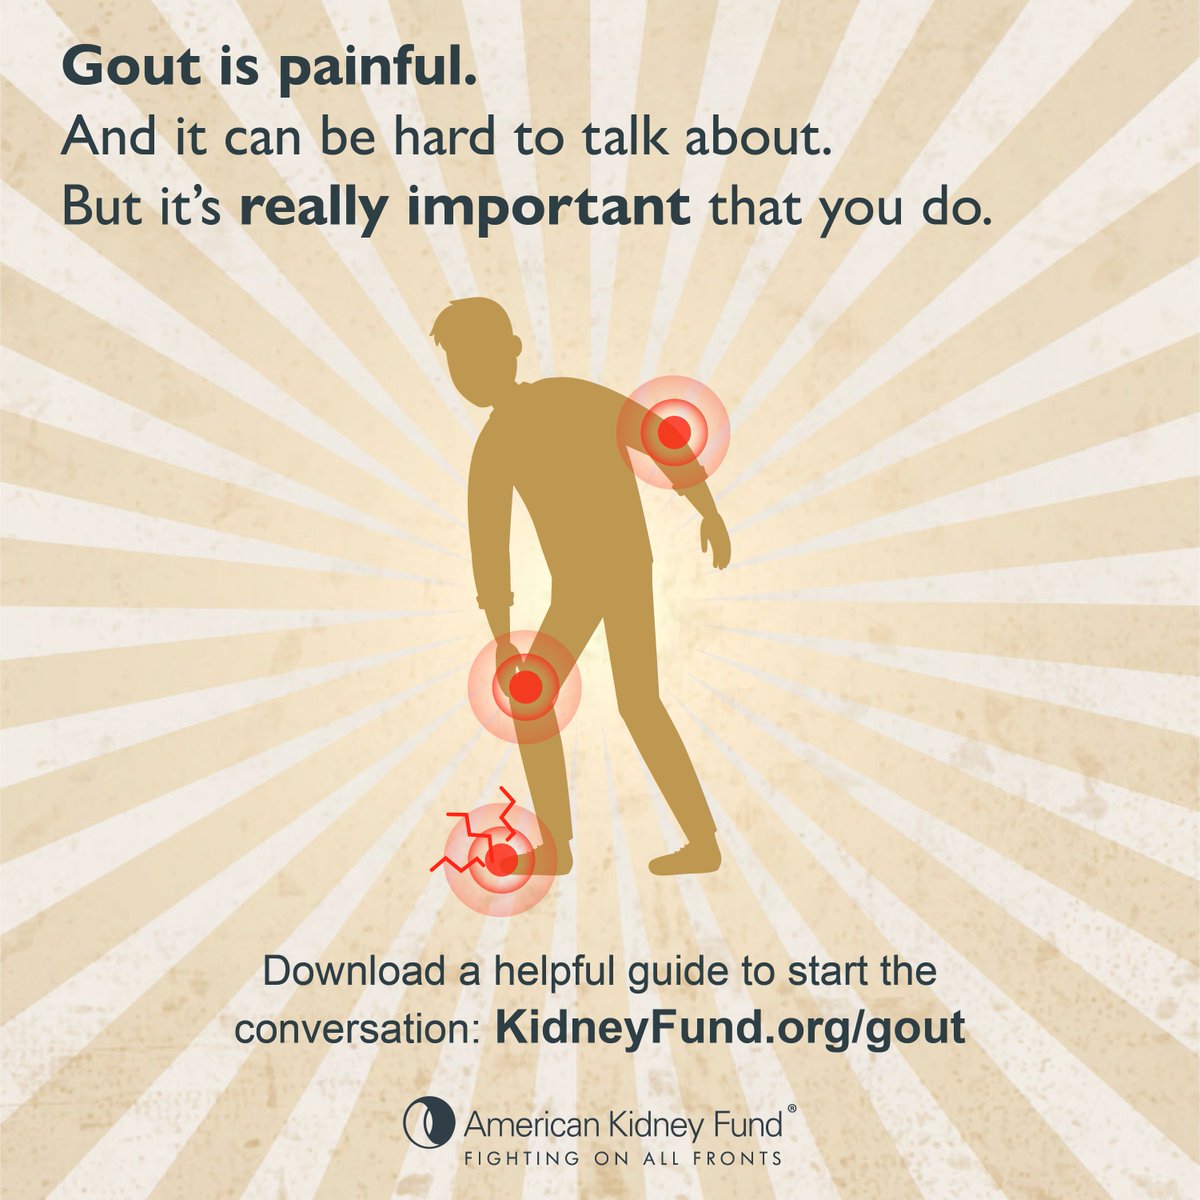 Kidney disease is a leading causes of gout, a painful arthritis caused by build up of uric acid in the body. Kidney disease & gout have a mutual relationship - either one could cause the other. Learn about the symptoms of gout & it’s tie to kidney disease: bit.ly/3VDax7N